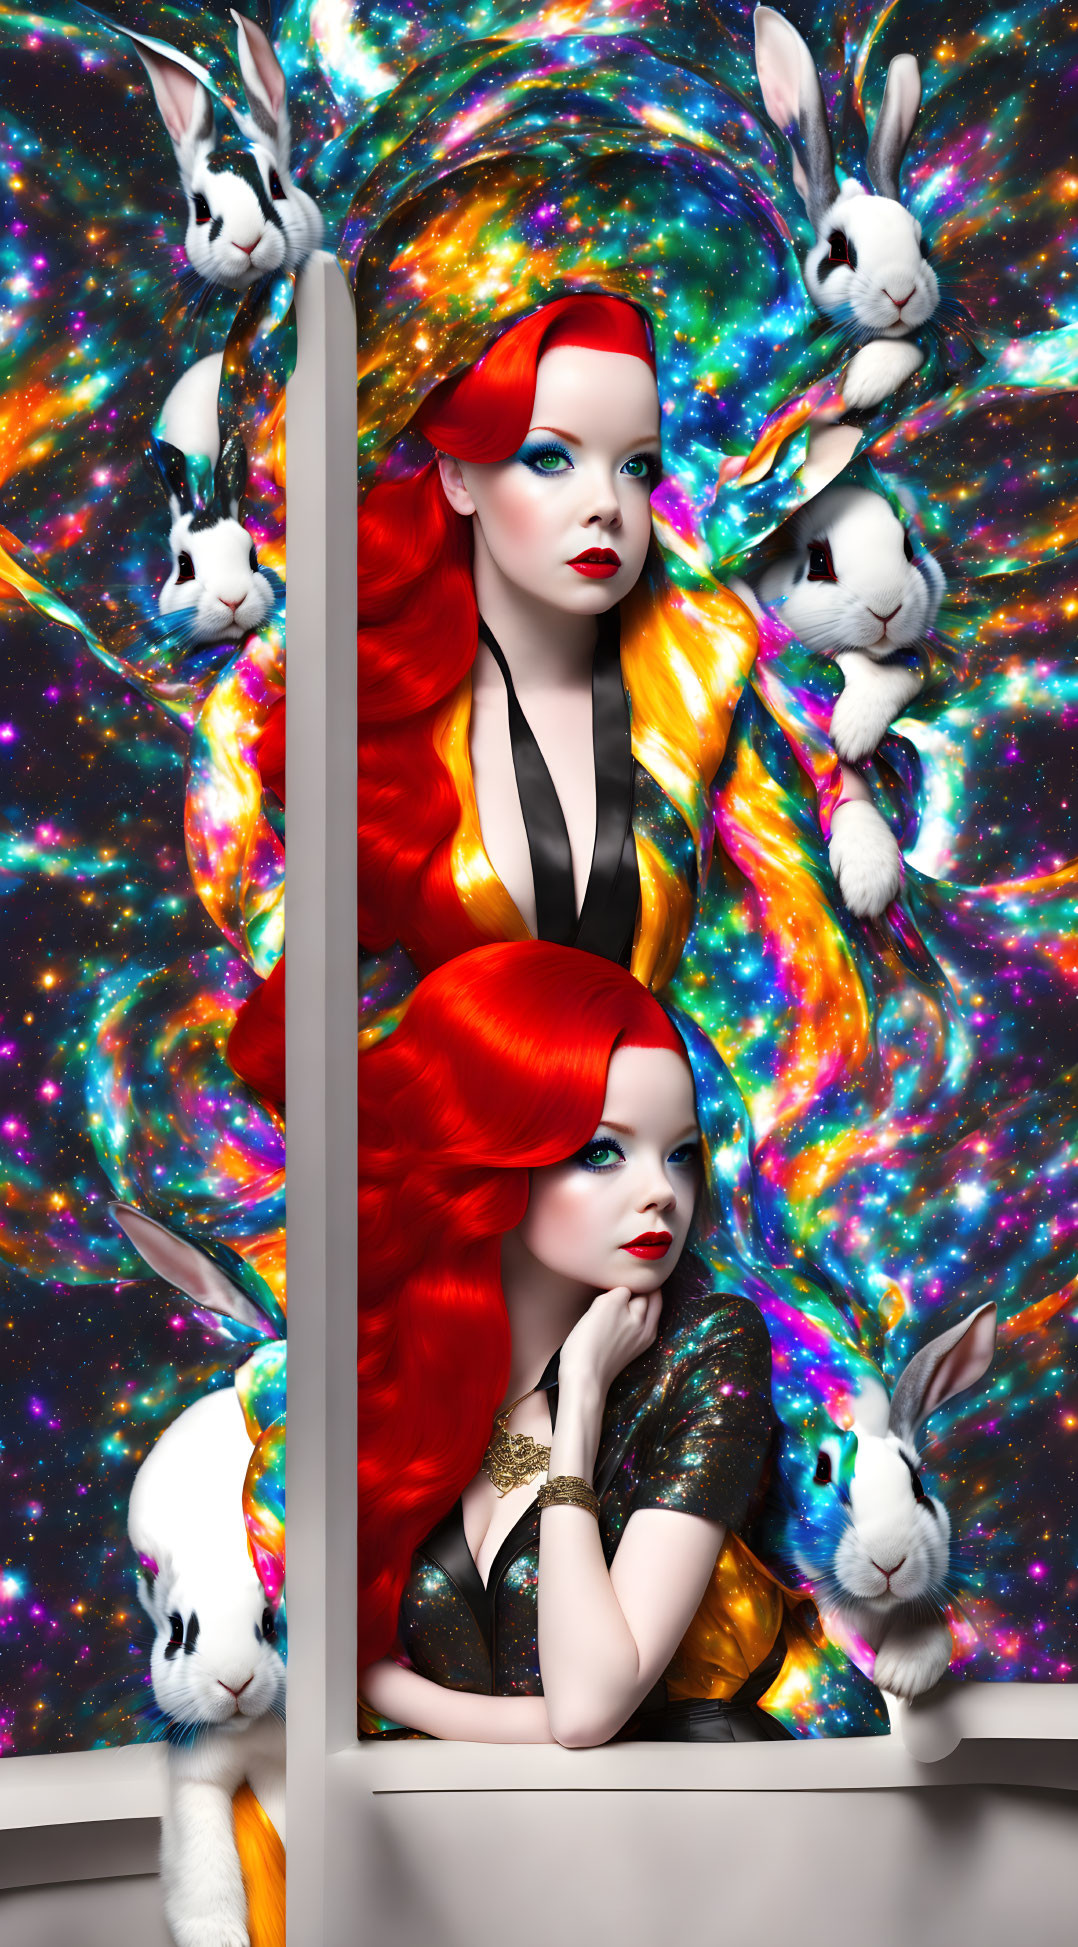 Vibrant image: Red-haired twin women with colorful makeup and white rabbits in cosmic setting